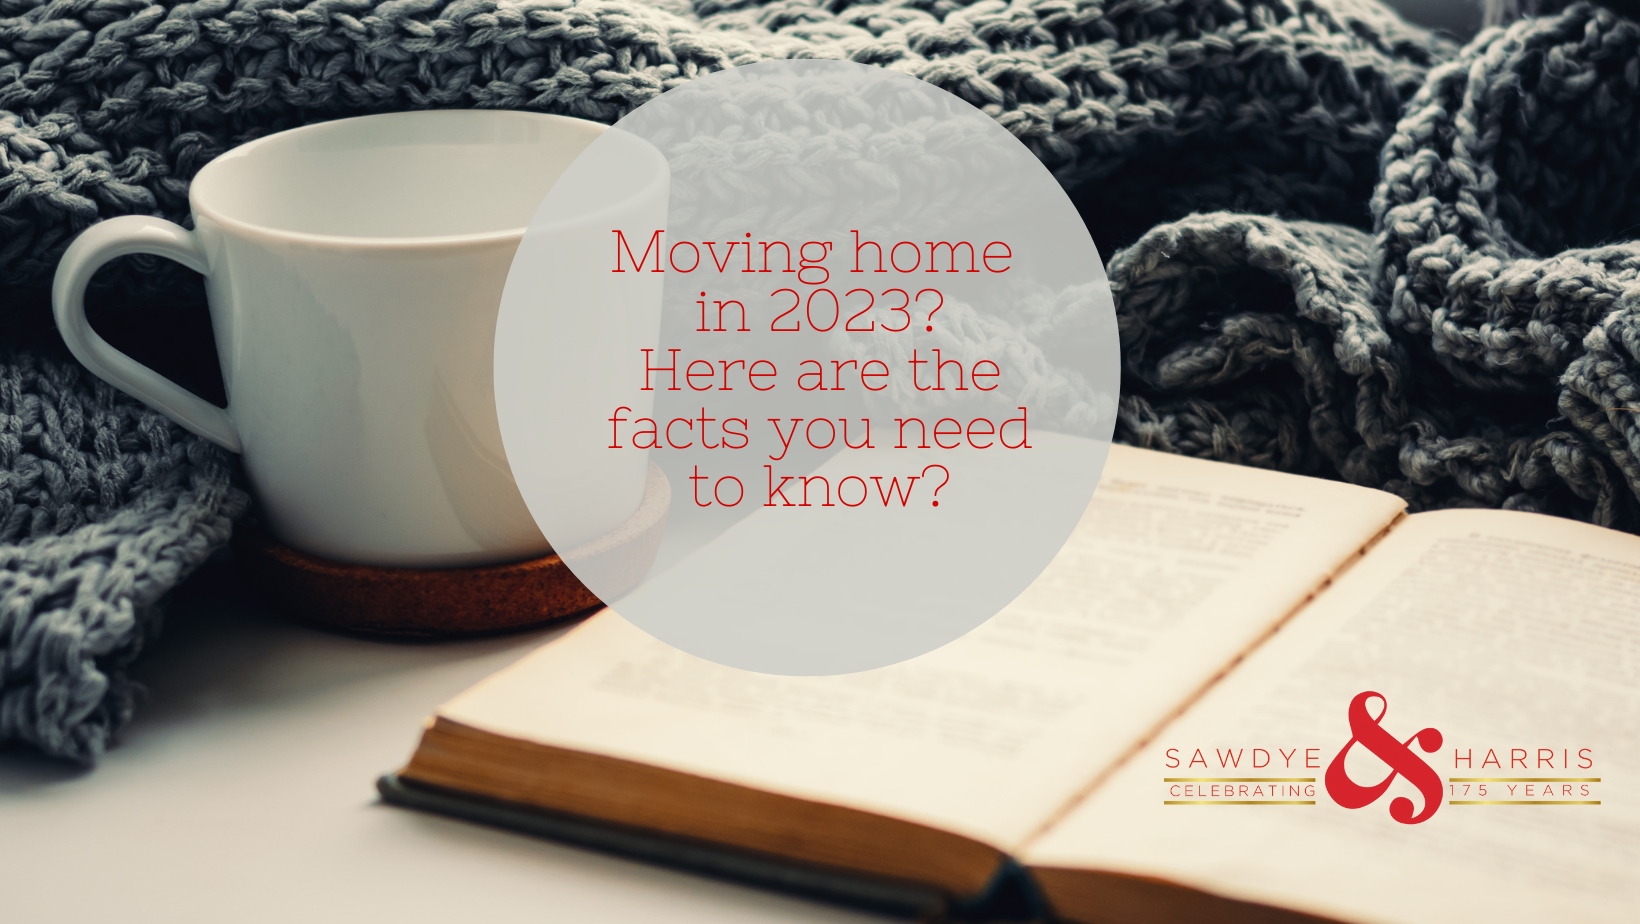 Moving home in 2023… Here are the key facts you need to know!